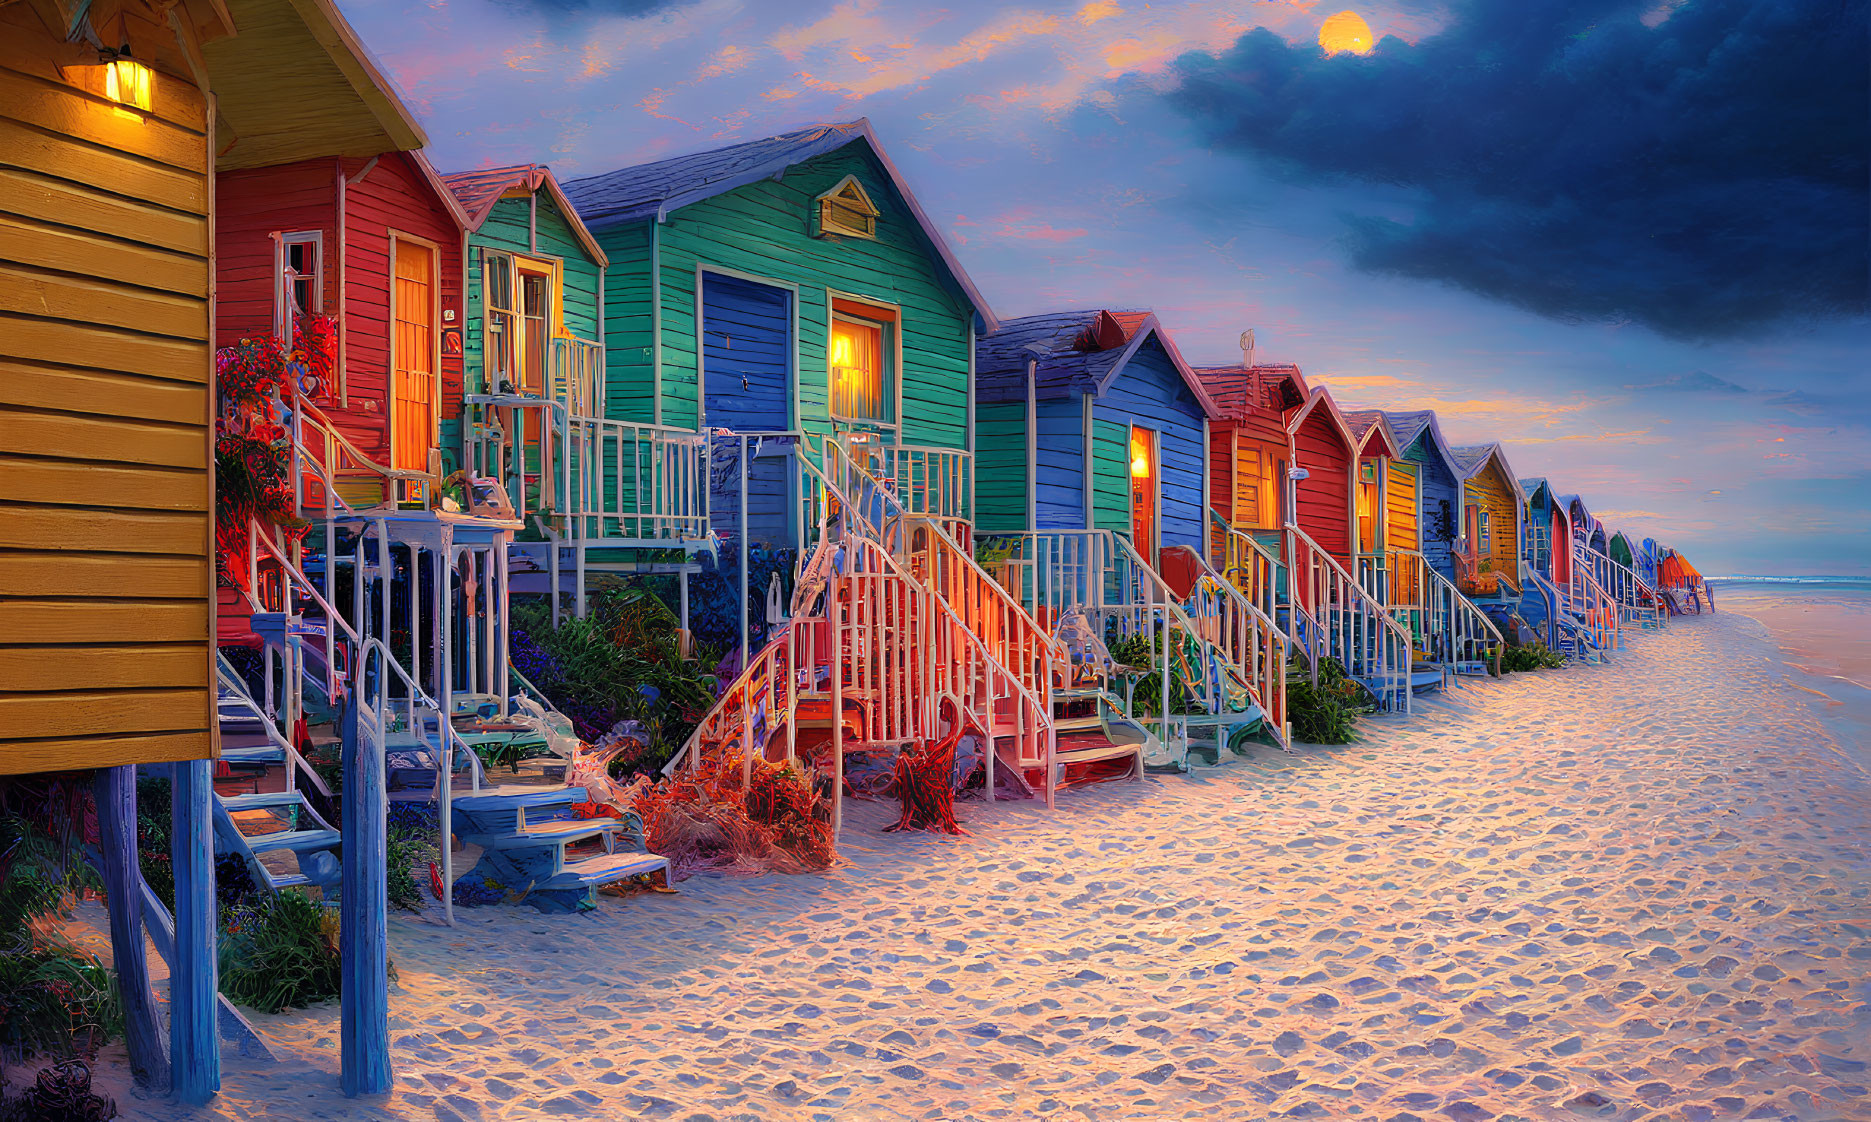 Colorful Beach Huts with Wooden Stairs at Twilight